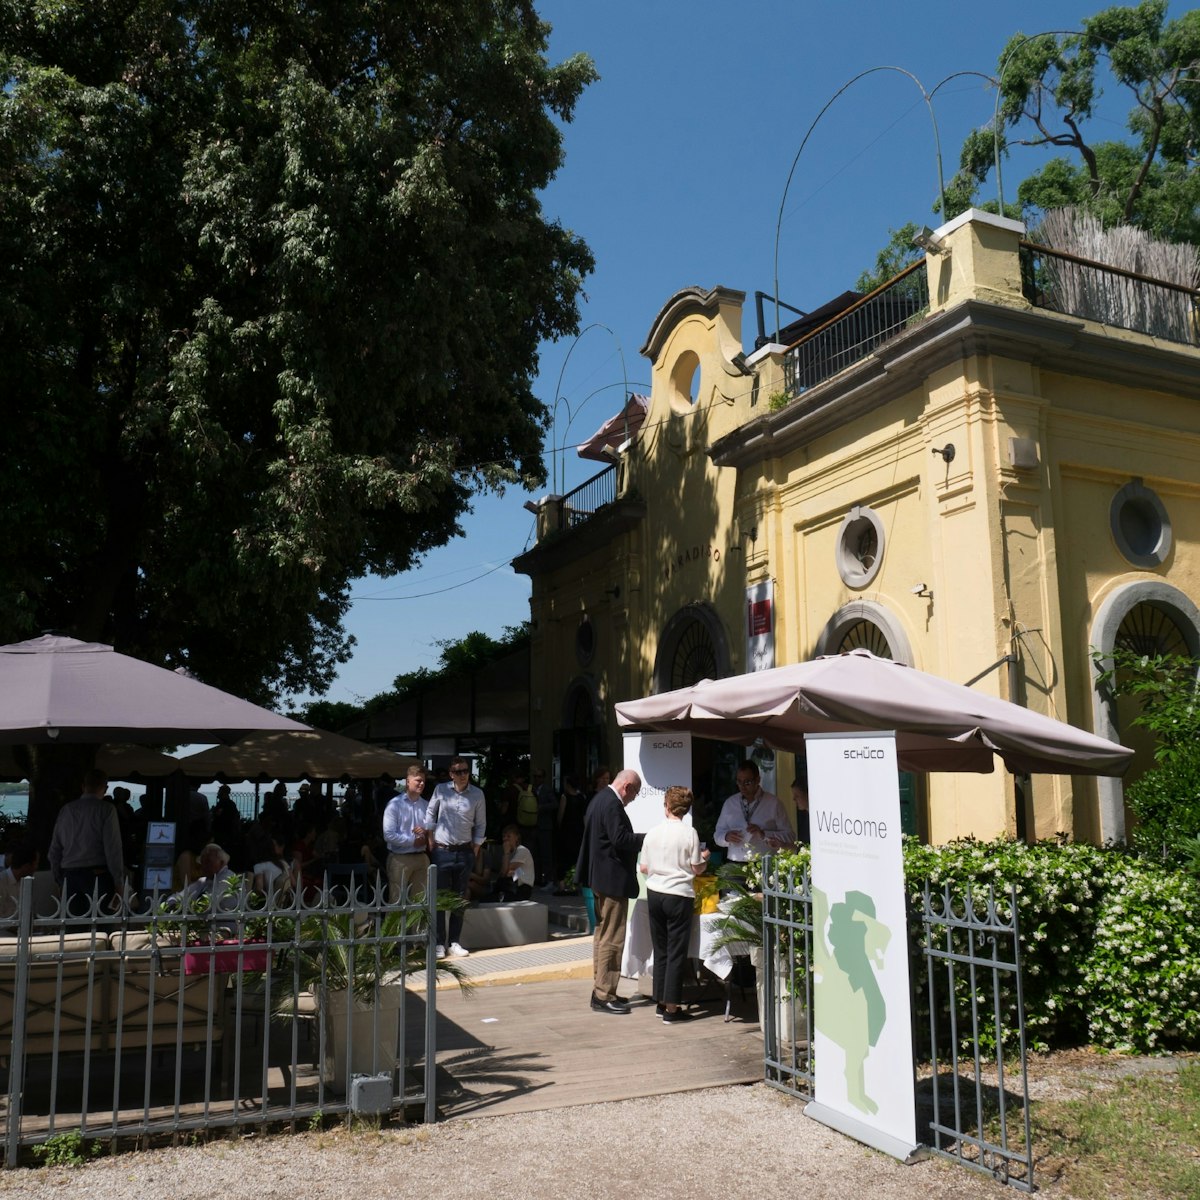 Paradiso stands in the heart of the Giardini